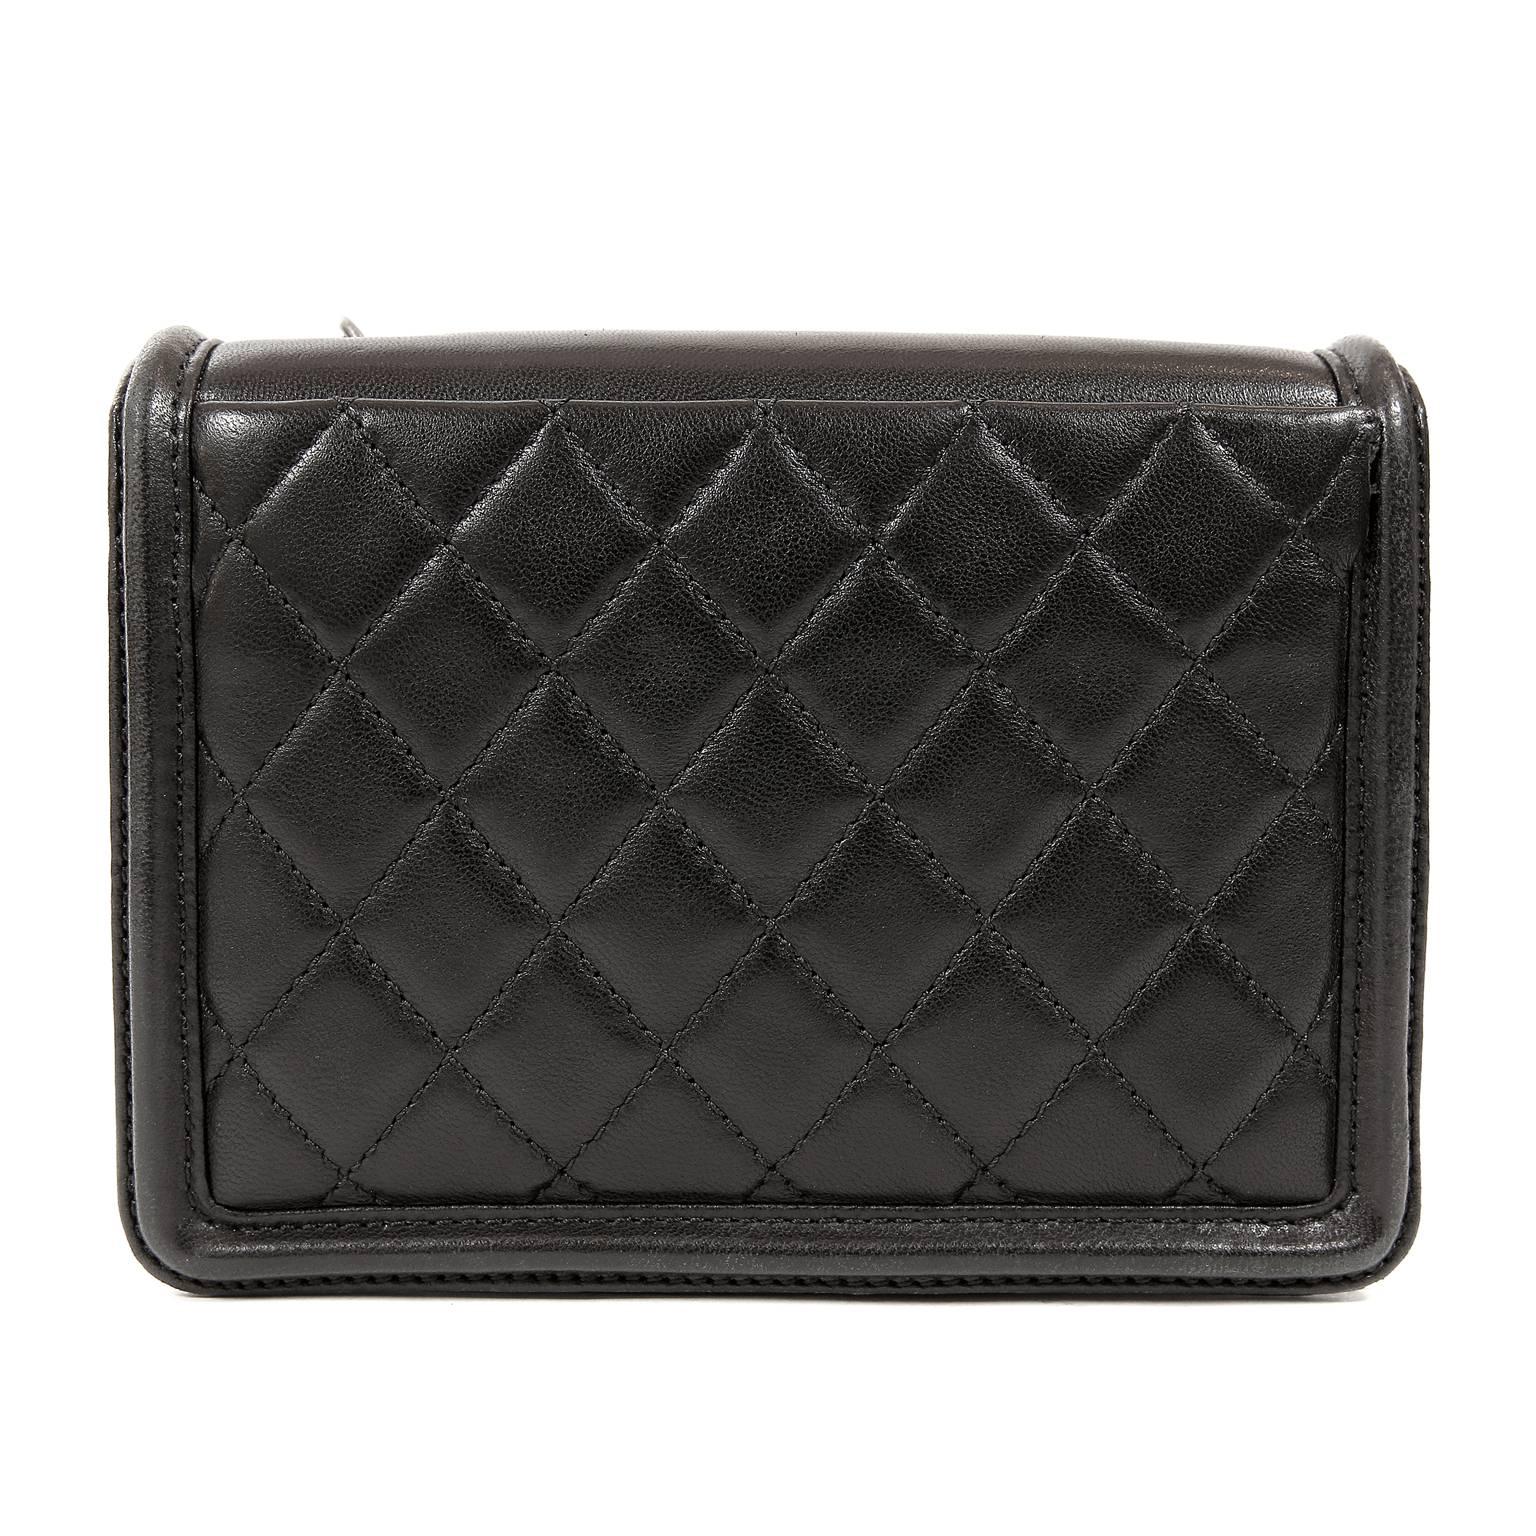 Chanel Boy Brick Flap Bag in Black- Pristine condition
  From the 2013 collection, the edgy Brick is the perfect companion for evening or daytime hands-free wear.
Black structured lather small flap bag has ruthenium interlocking CC adorning the